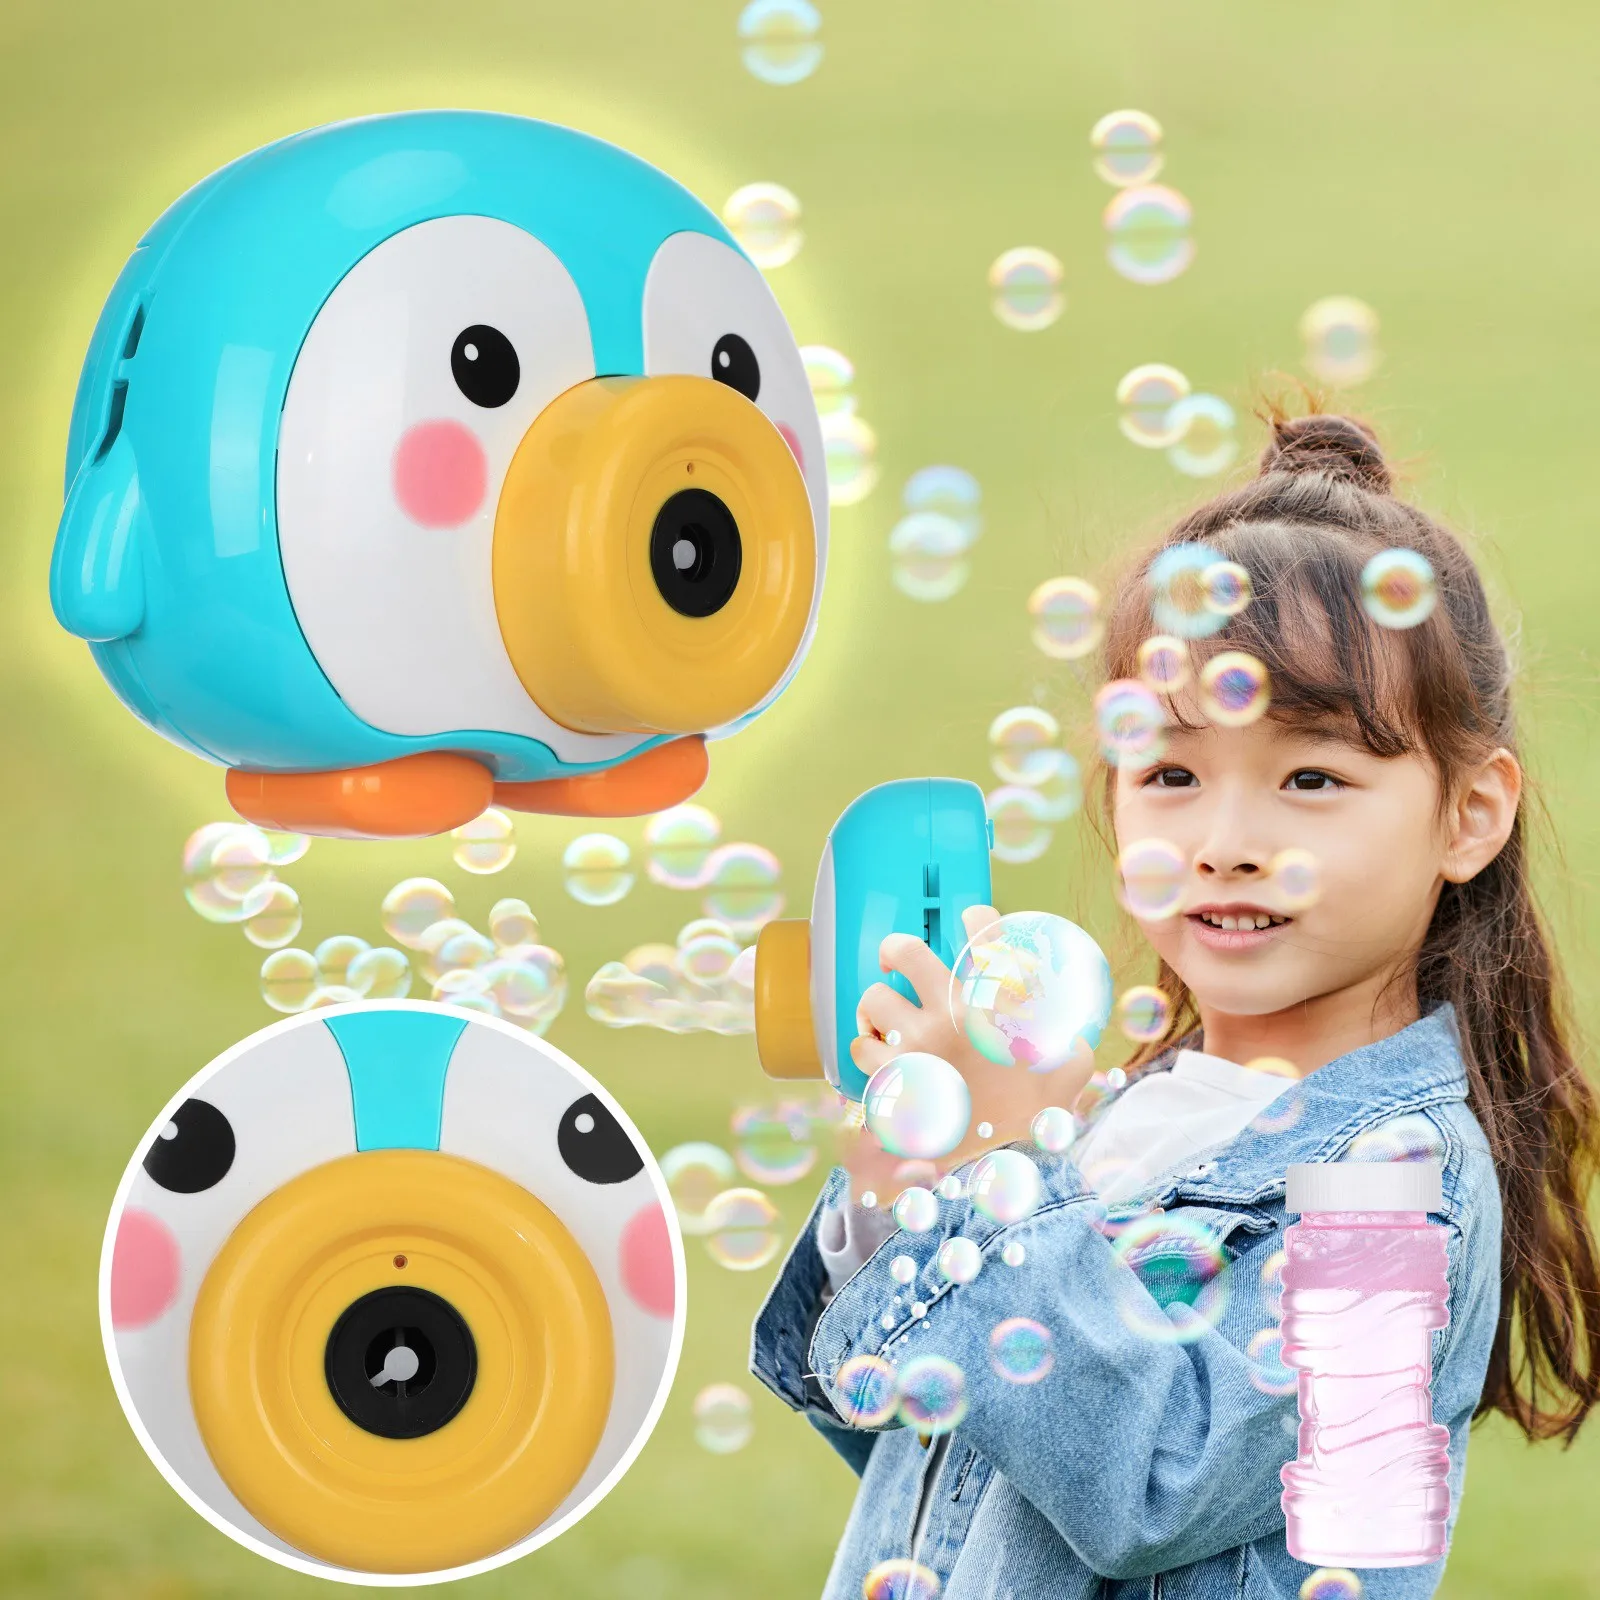 Penguin Bubble Automatic Bubble Machine with Bubble Solution for Kids Toddlers 